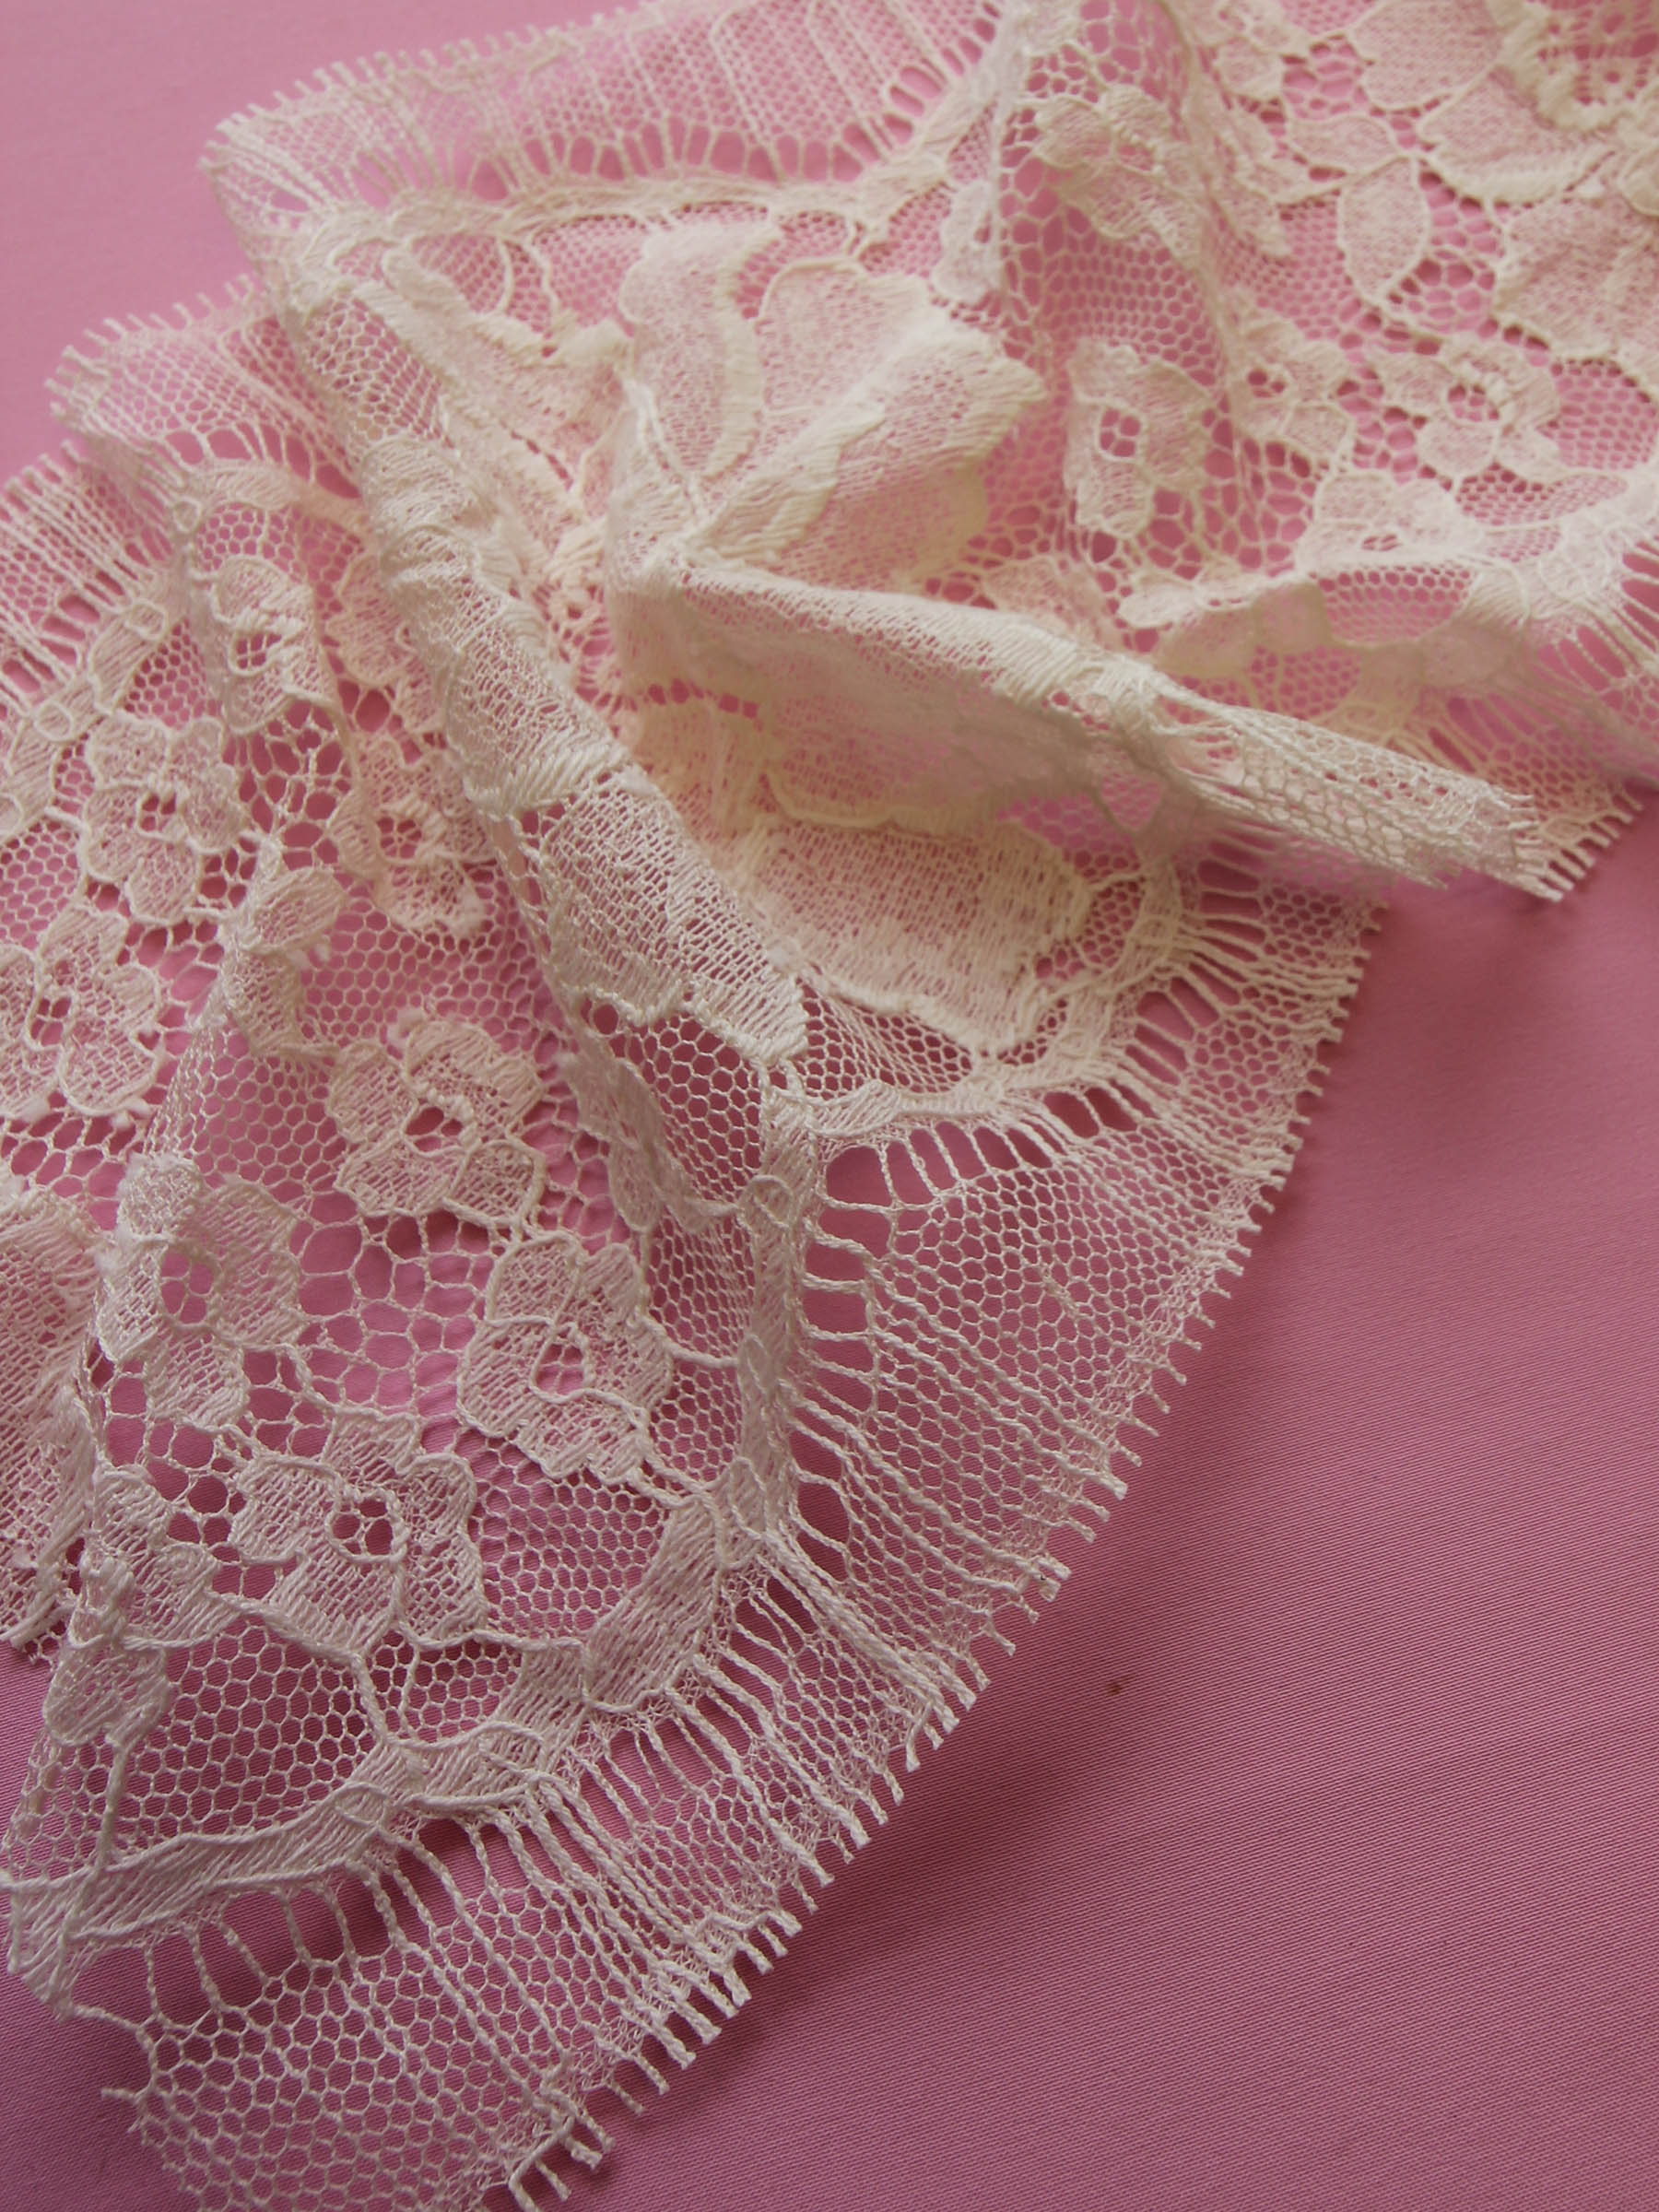 Bright Pink Lace Trim - Lace trim - lace fabric from